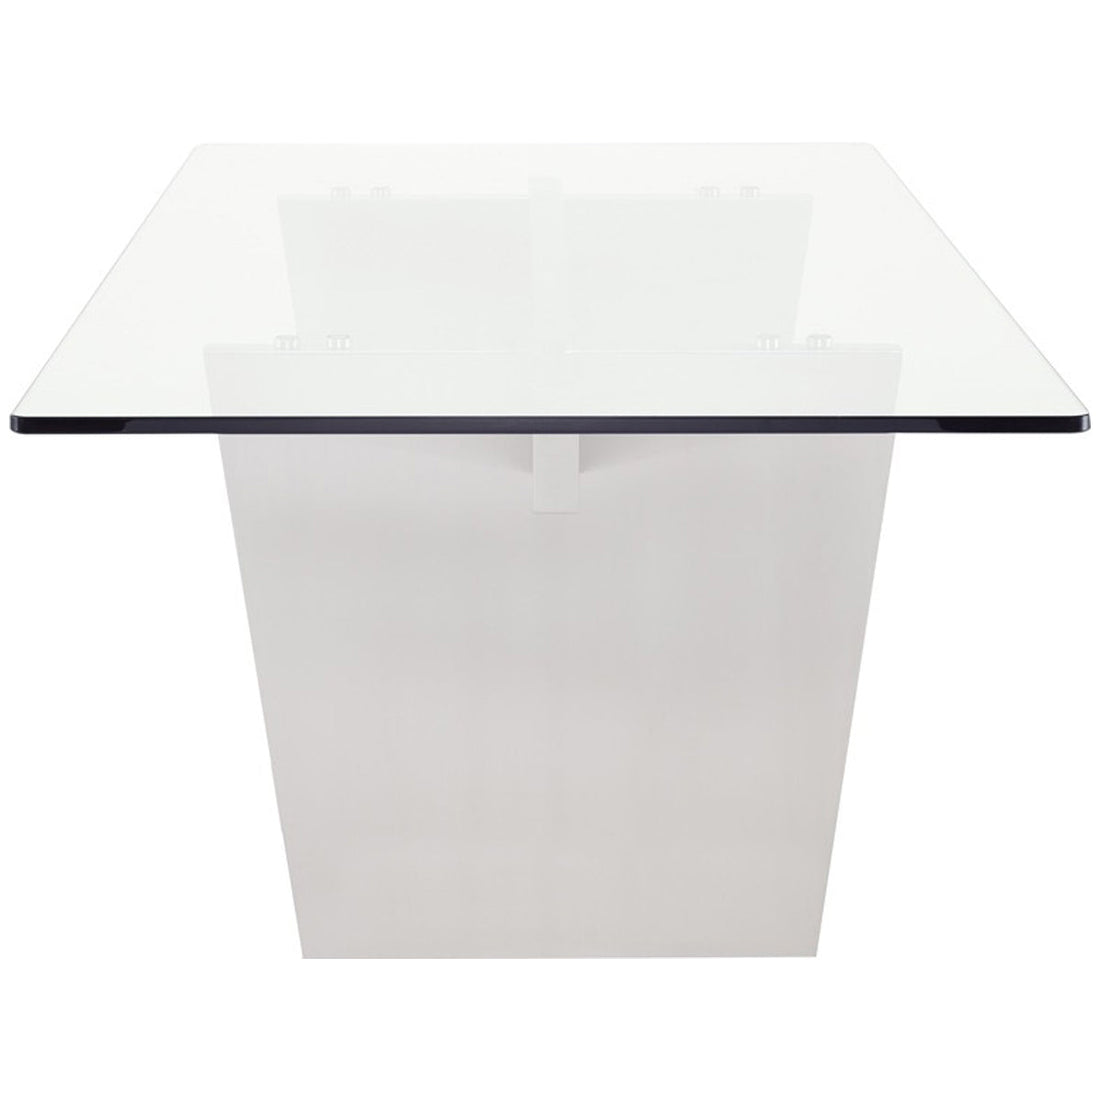 Nuevo Living Aiden Dining Table - Glass Top